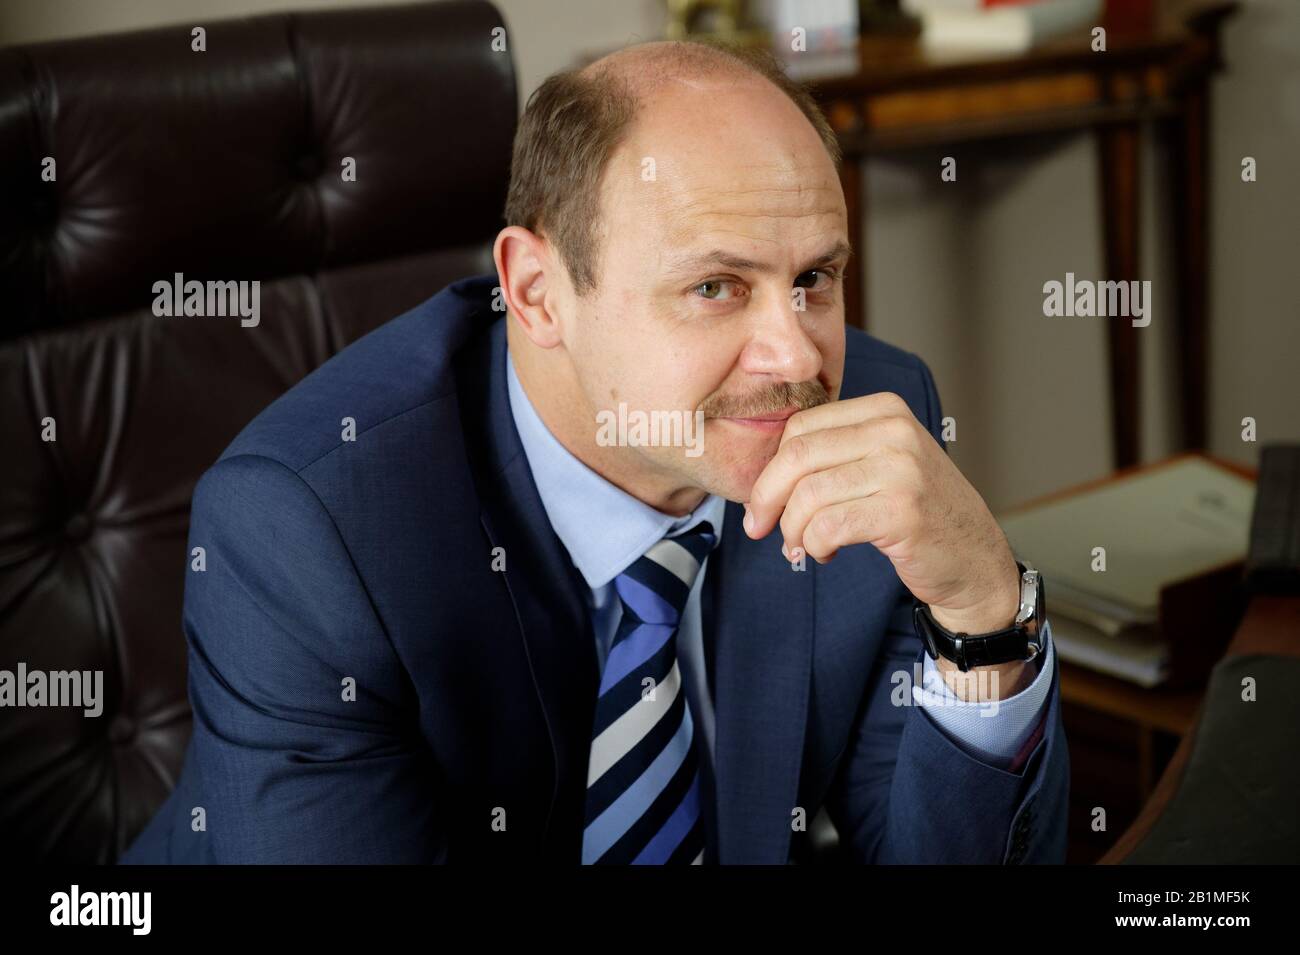 Cologne, Germany. 26th Feb, 2020. The actor Moritz Führmann sits on the film set during shooting for the second season of the ARD lawyers' series 'Falk'. Credit: Henning Kaiser/dpa/Alamy Live News Stock Photo